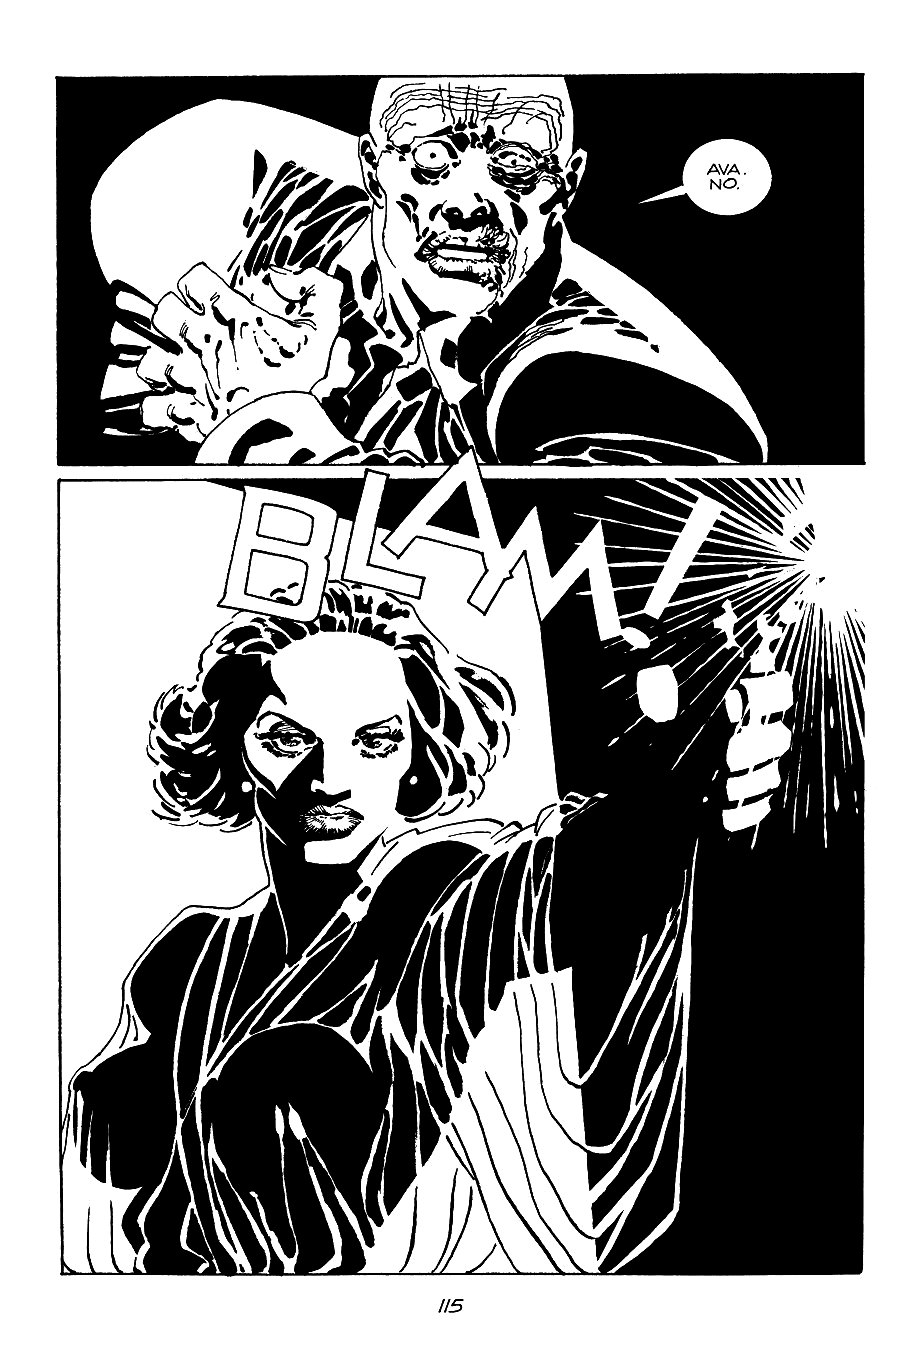 page 115 of sin city 2 the hard goodbye